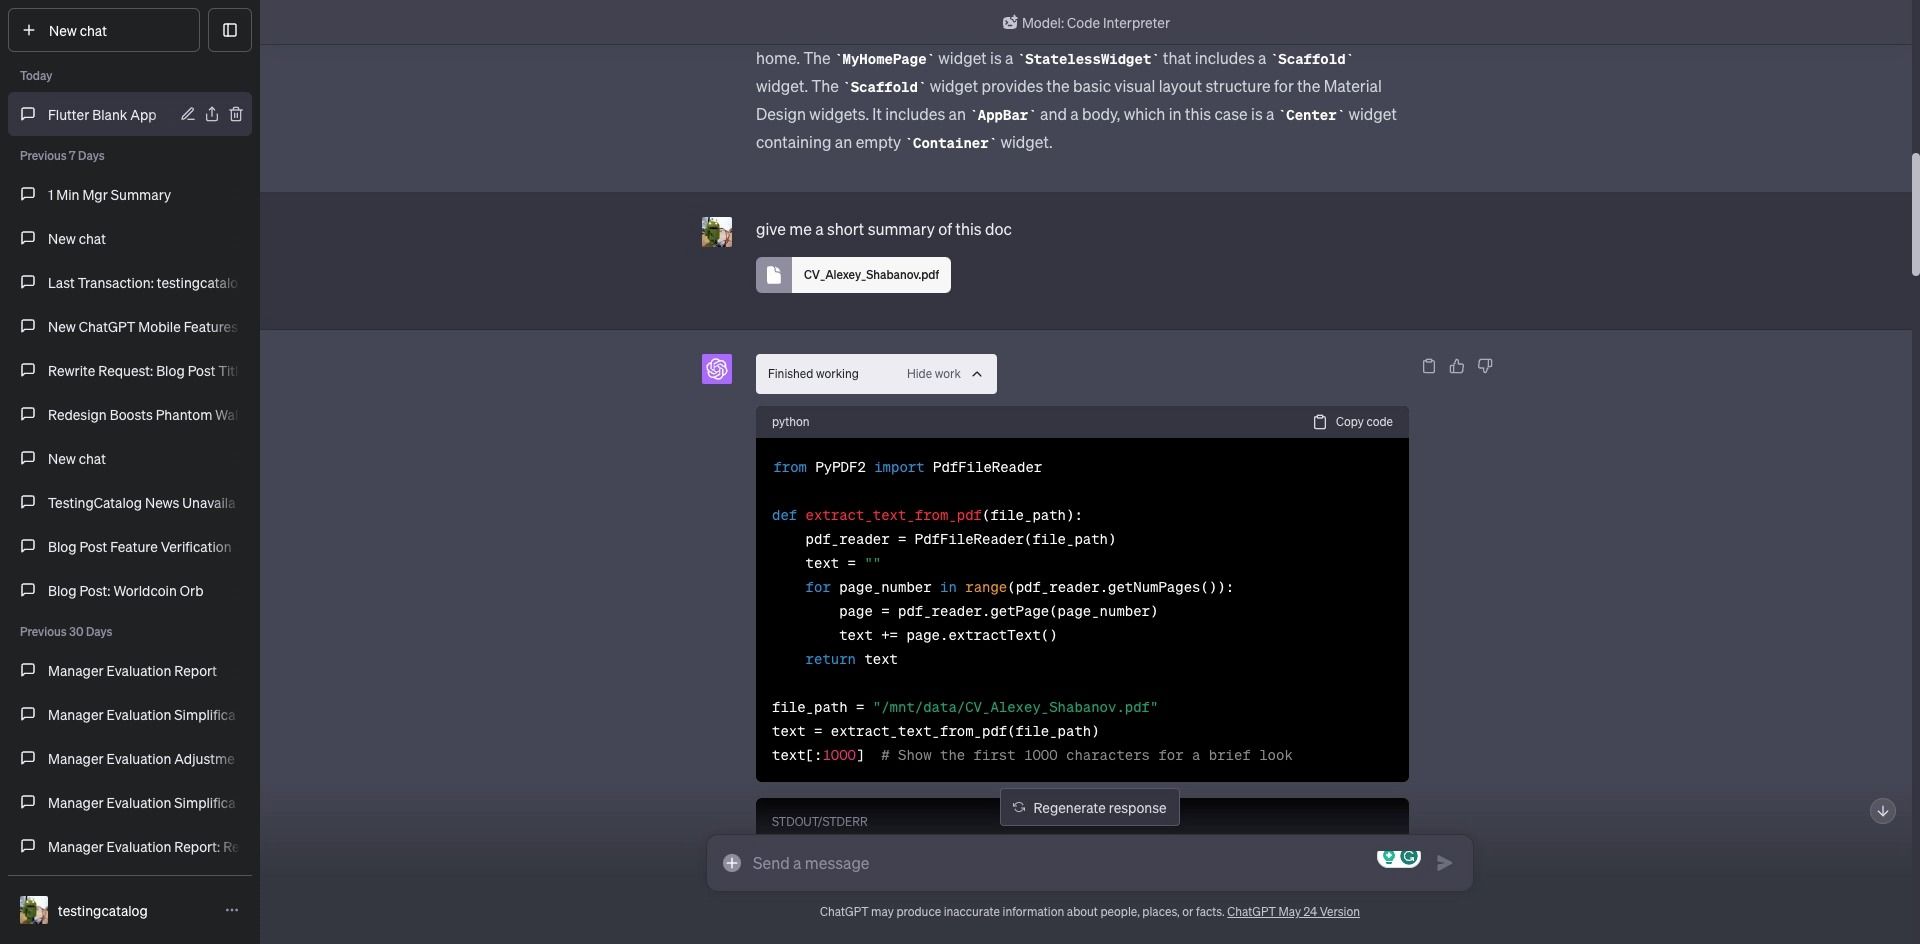 ChatGPT's new feature, code interpreter, is now available to all plus subscribers